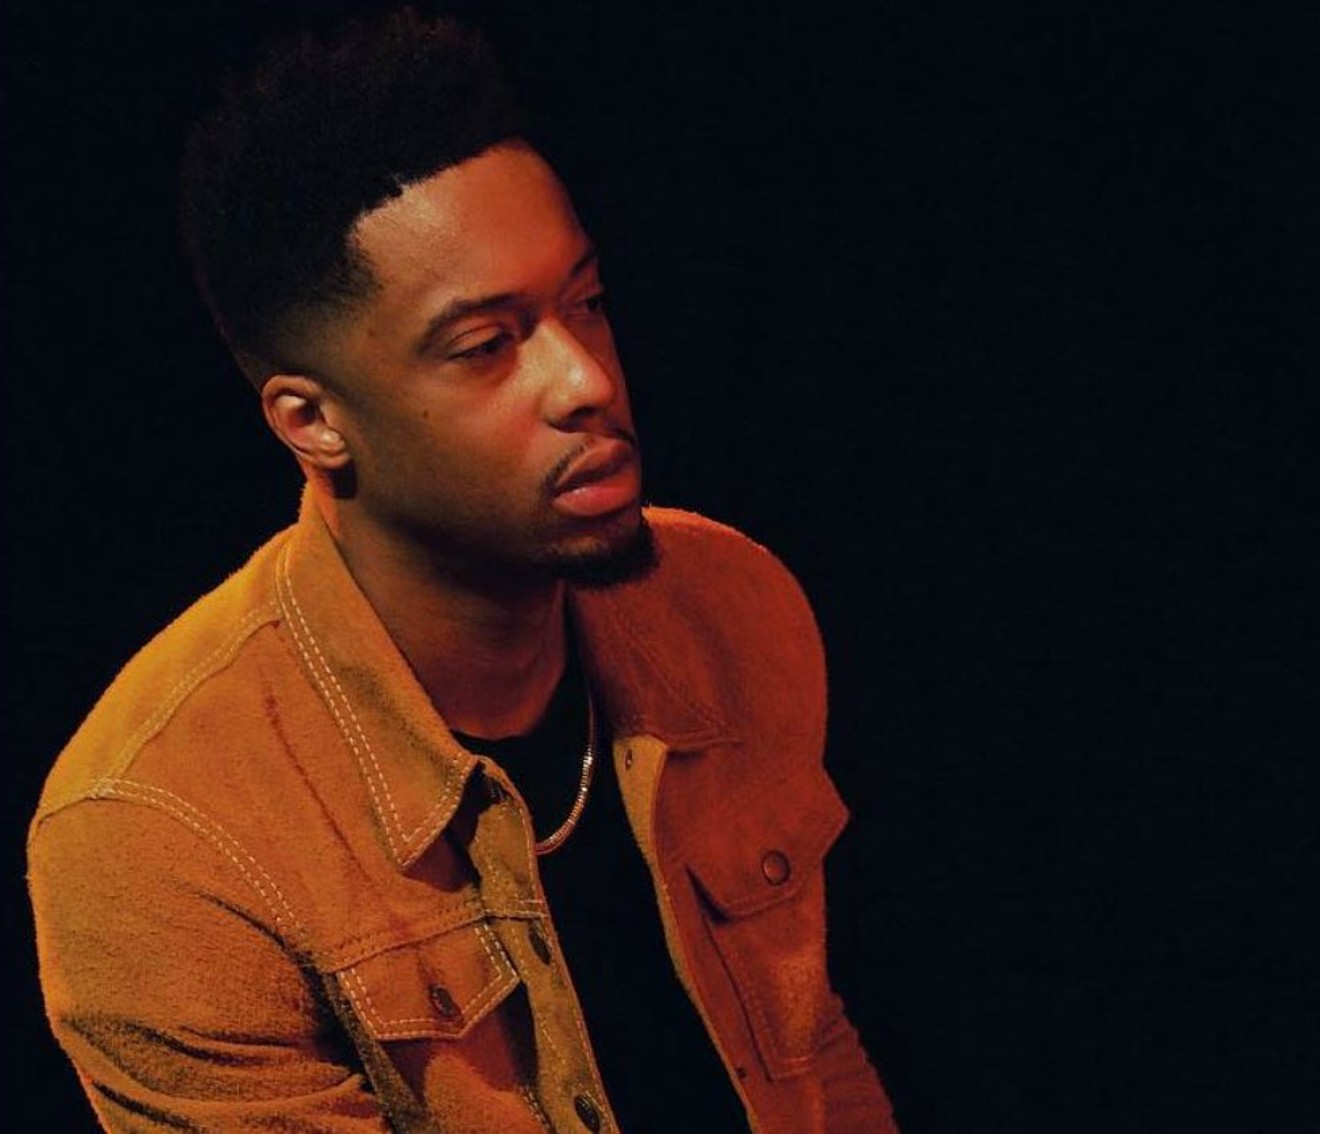 Curtis Cross is the veteran rapper and producer Black Milk.